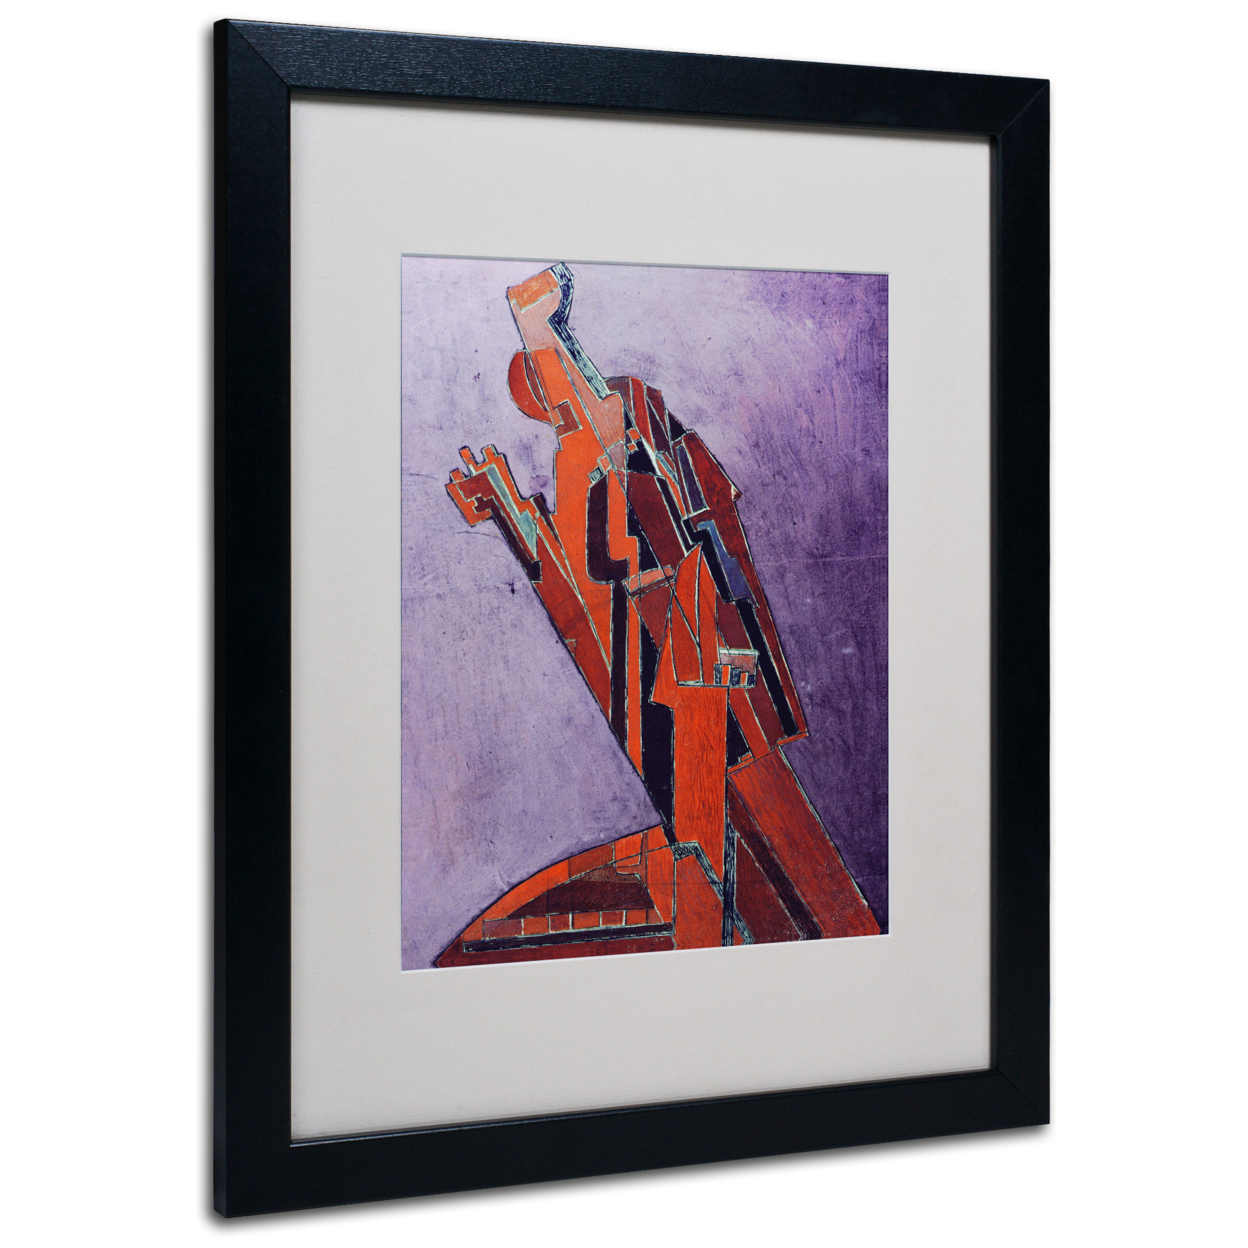 Lawrence Atkinson 'Figure Study' Black Wooden Framed Art 18 X 22 Inches